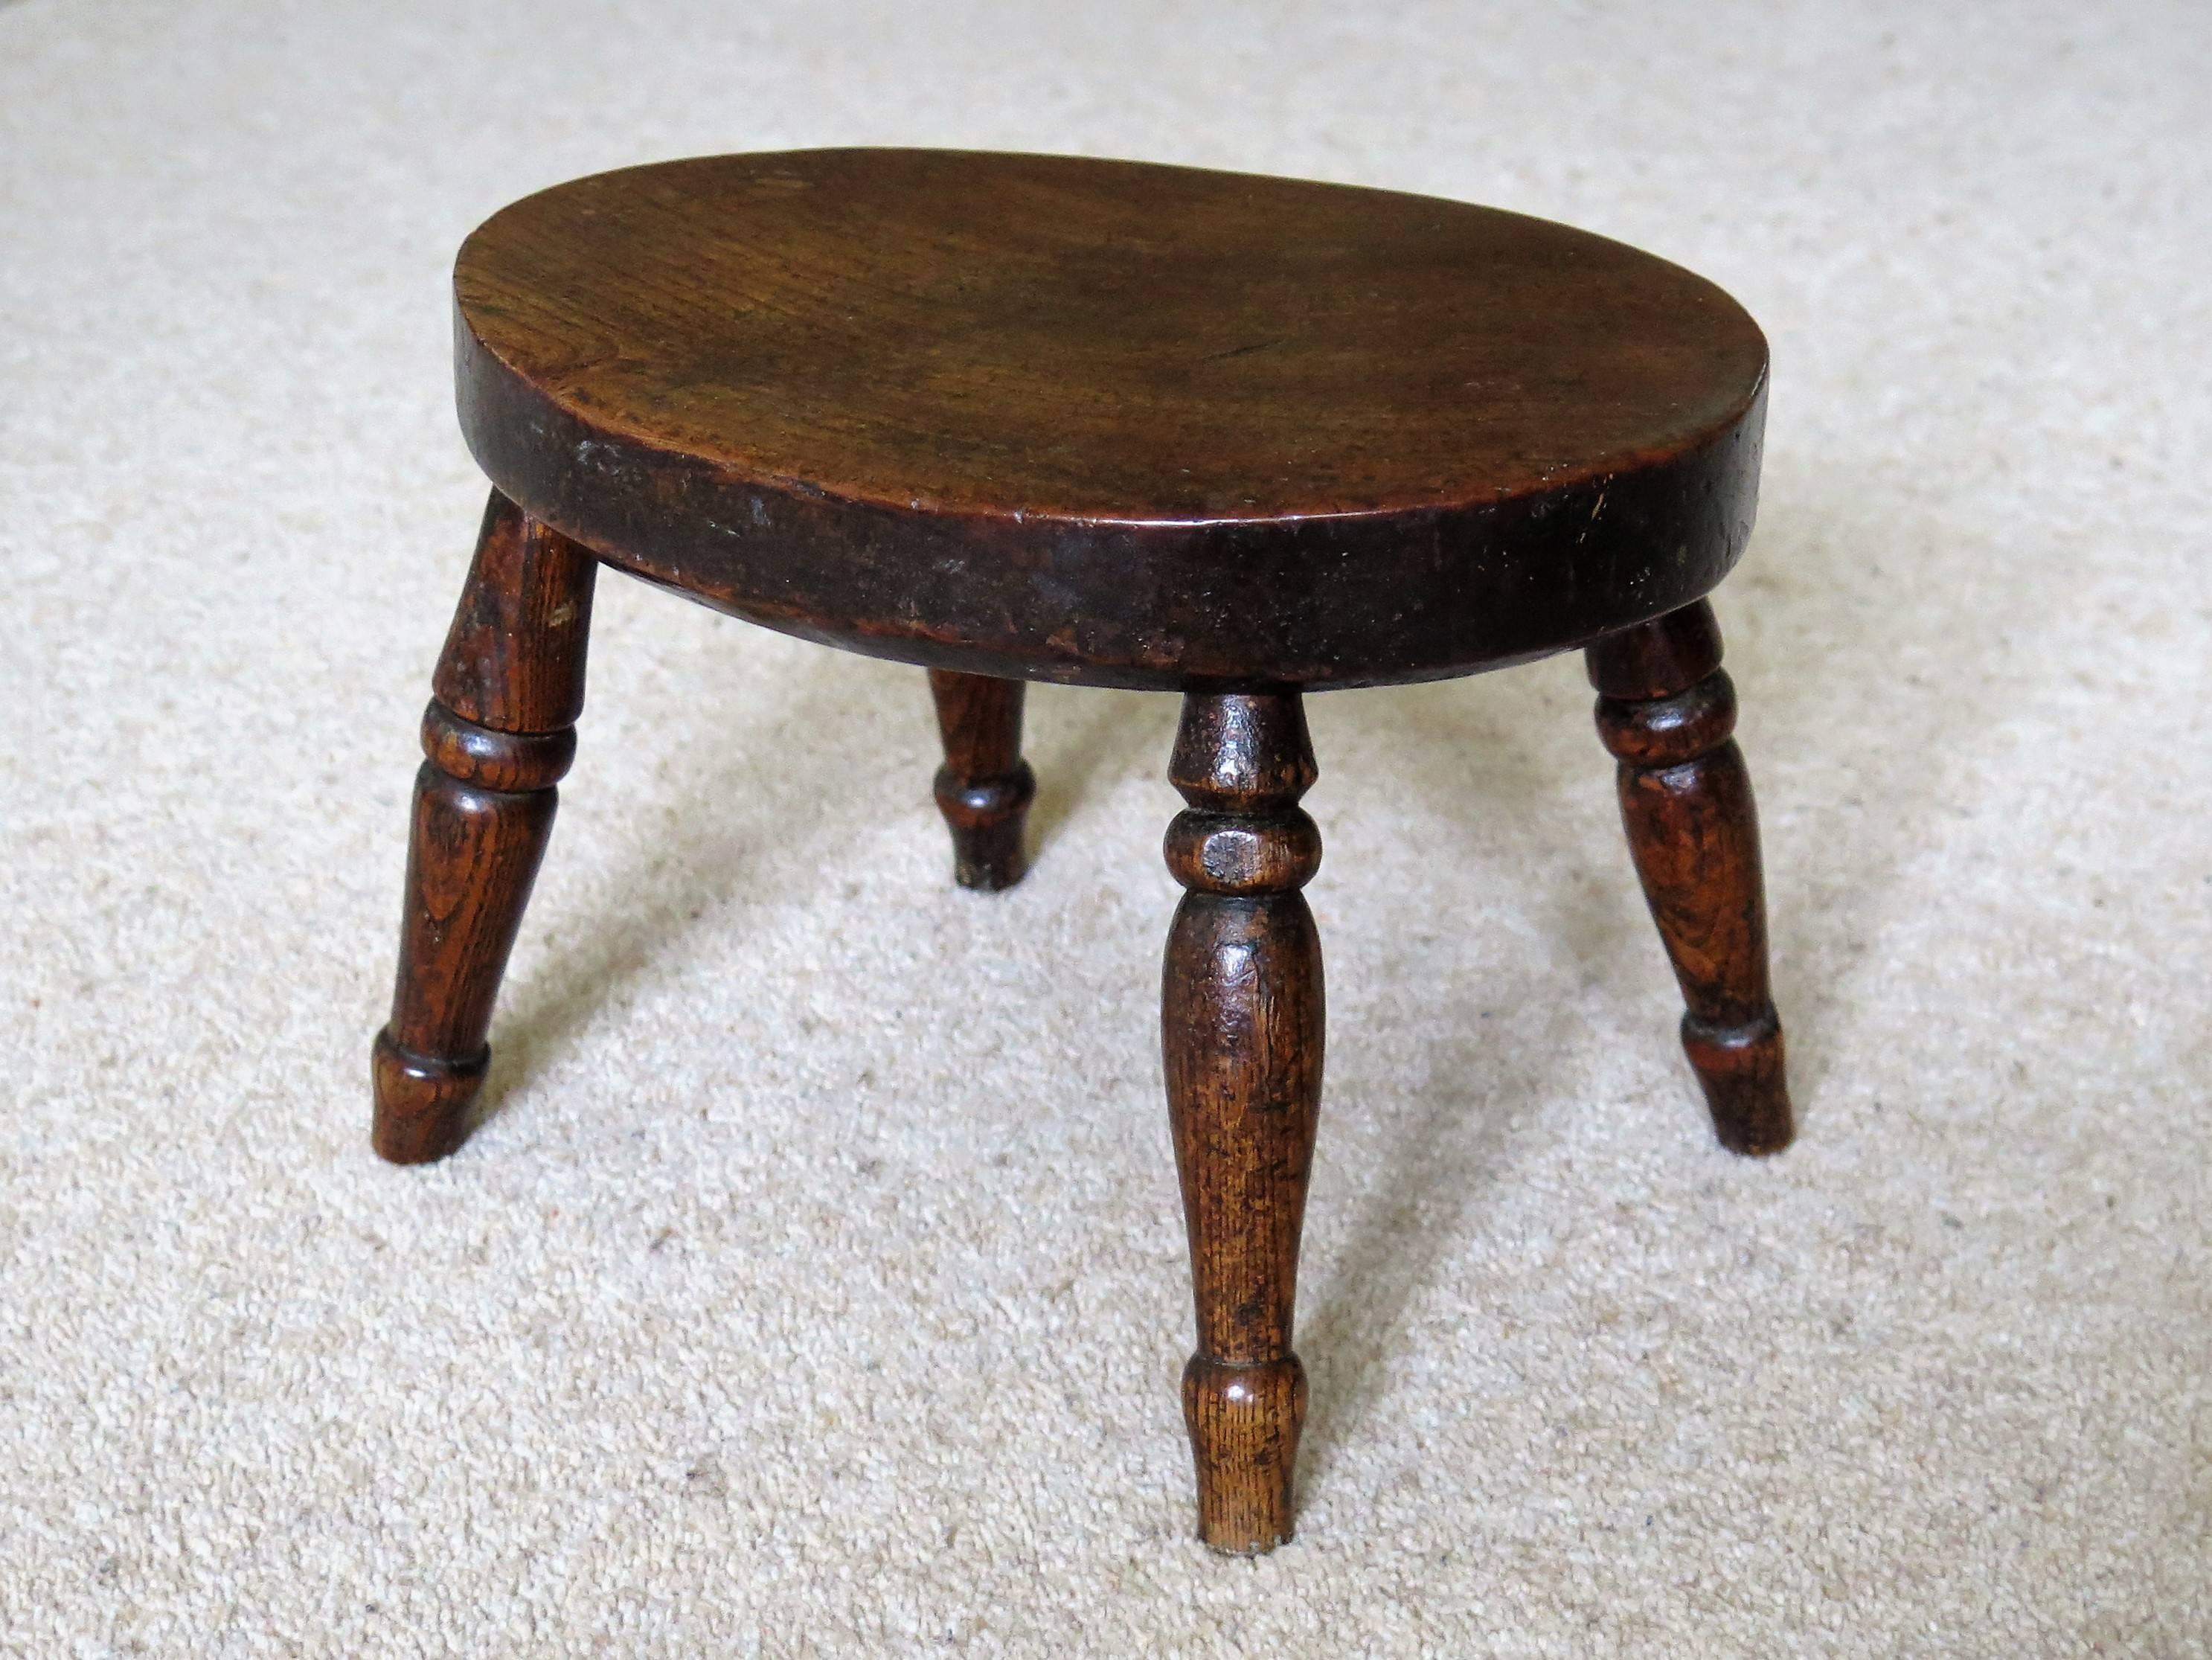 Hand-Crafted Early 19th Century Country Stool or Candle Stand solid elm, English Circa 1820